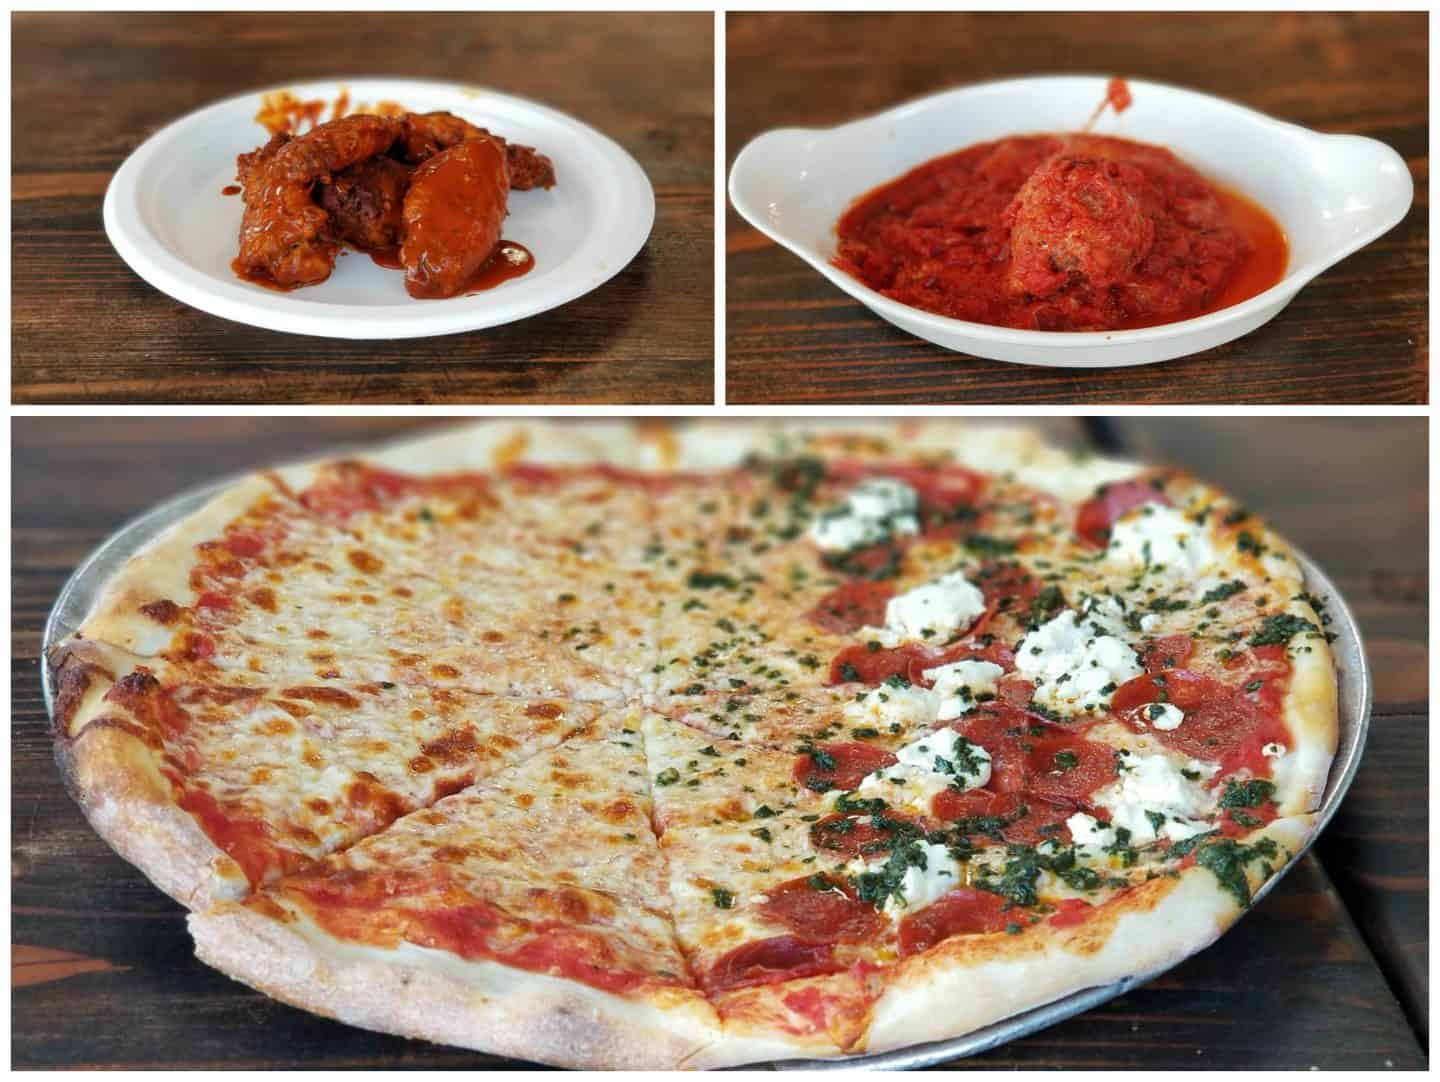 Pizza and appetizers from Landini's Pizzeria